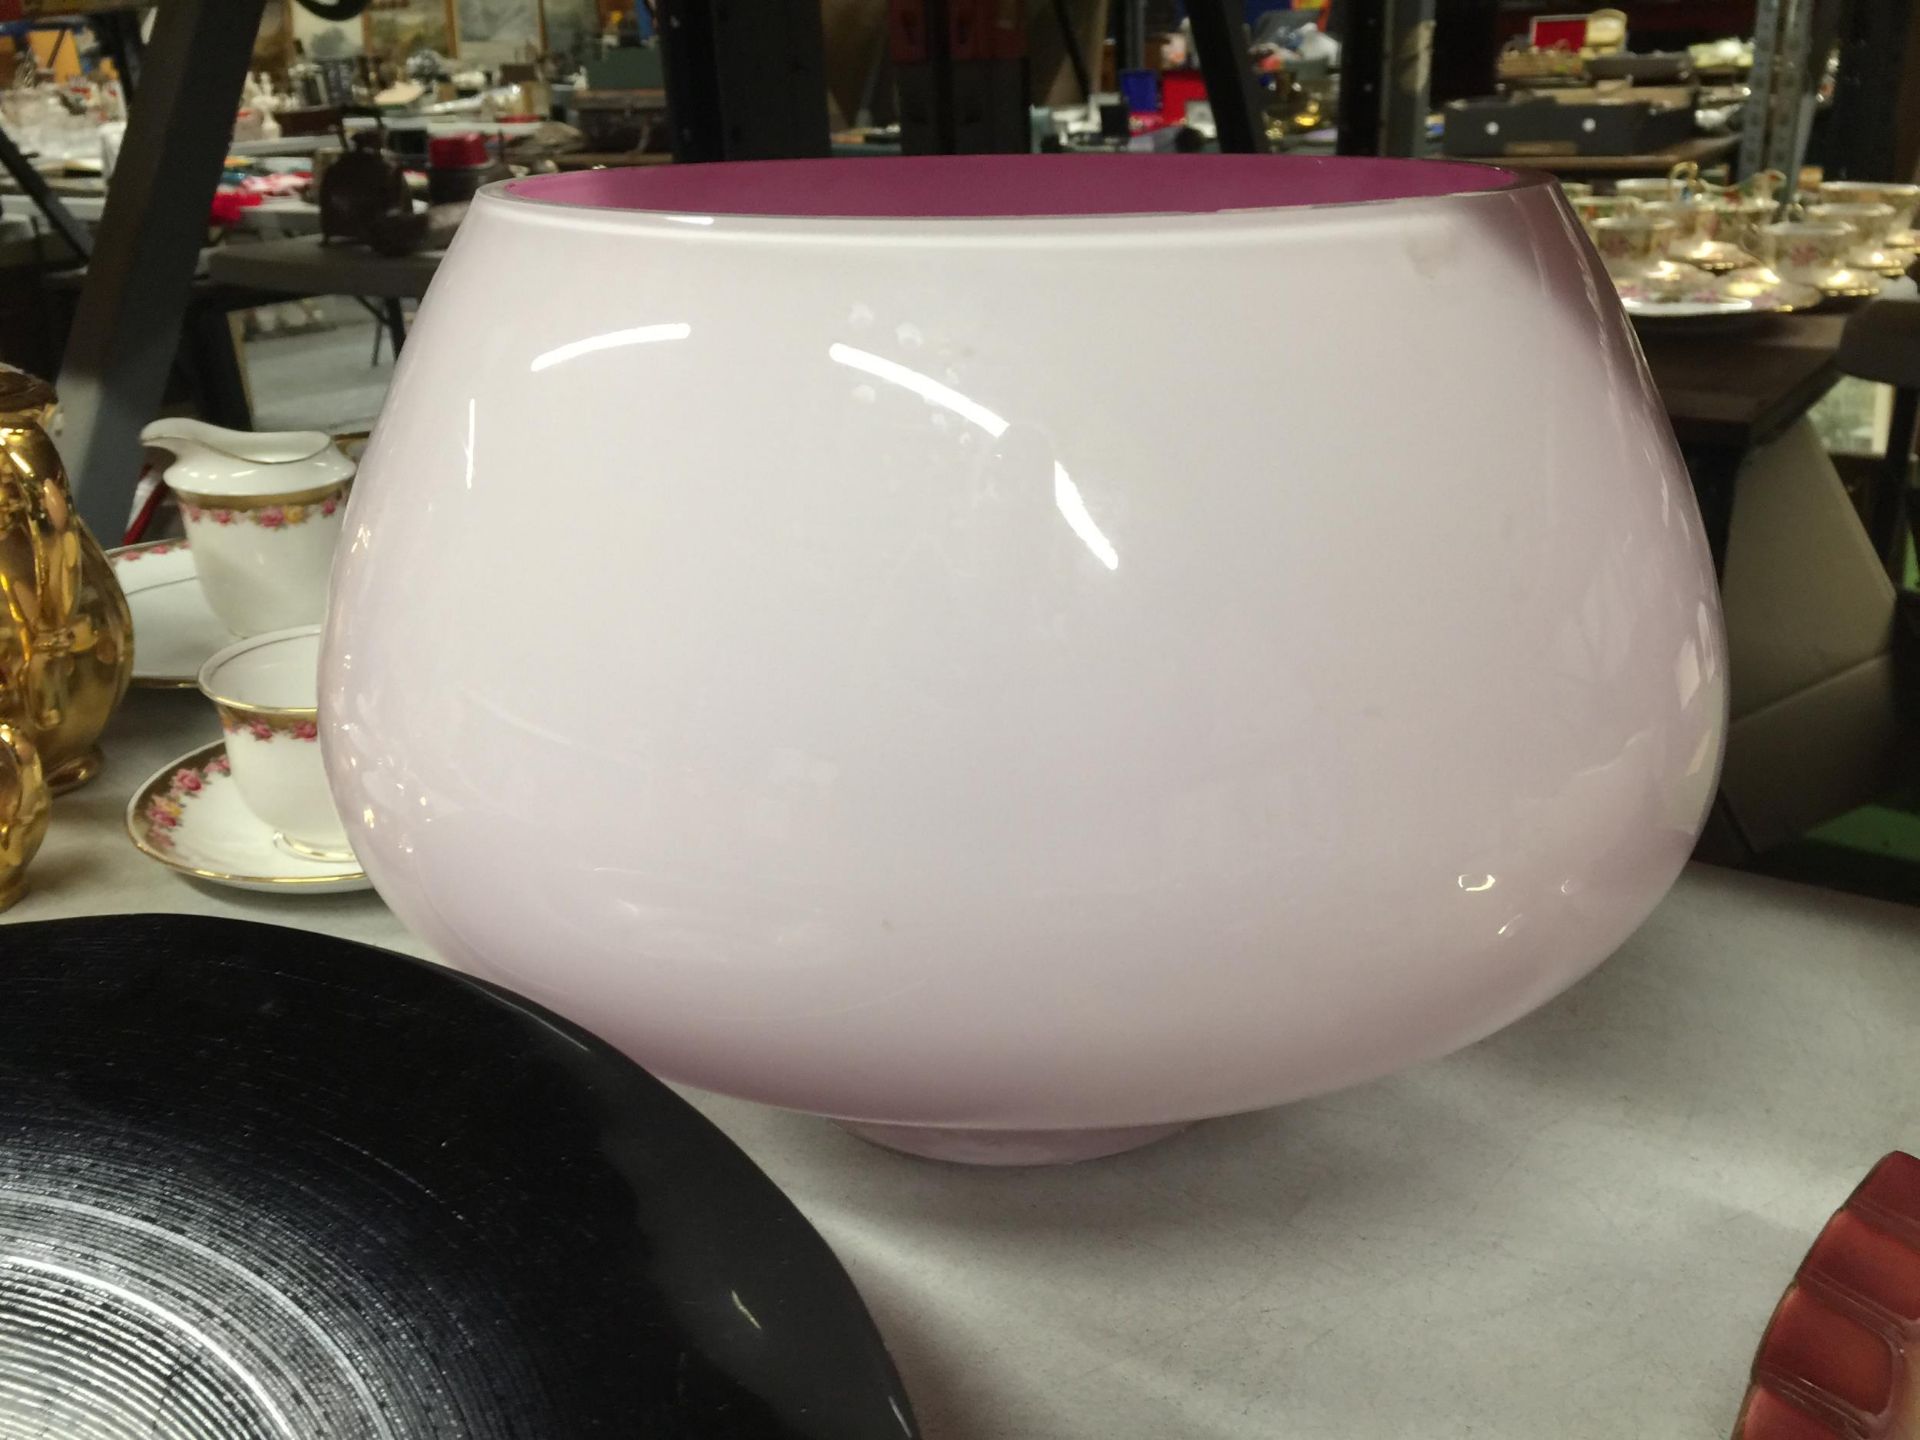 A LARGE PINK GLASS BOWL PLUS A LARGE BLACK AND SILVER BOWL - Image 3 of 3